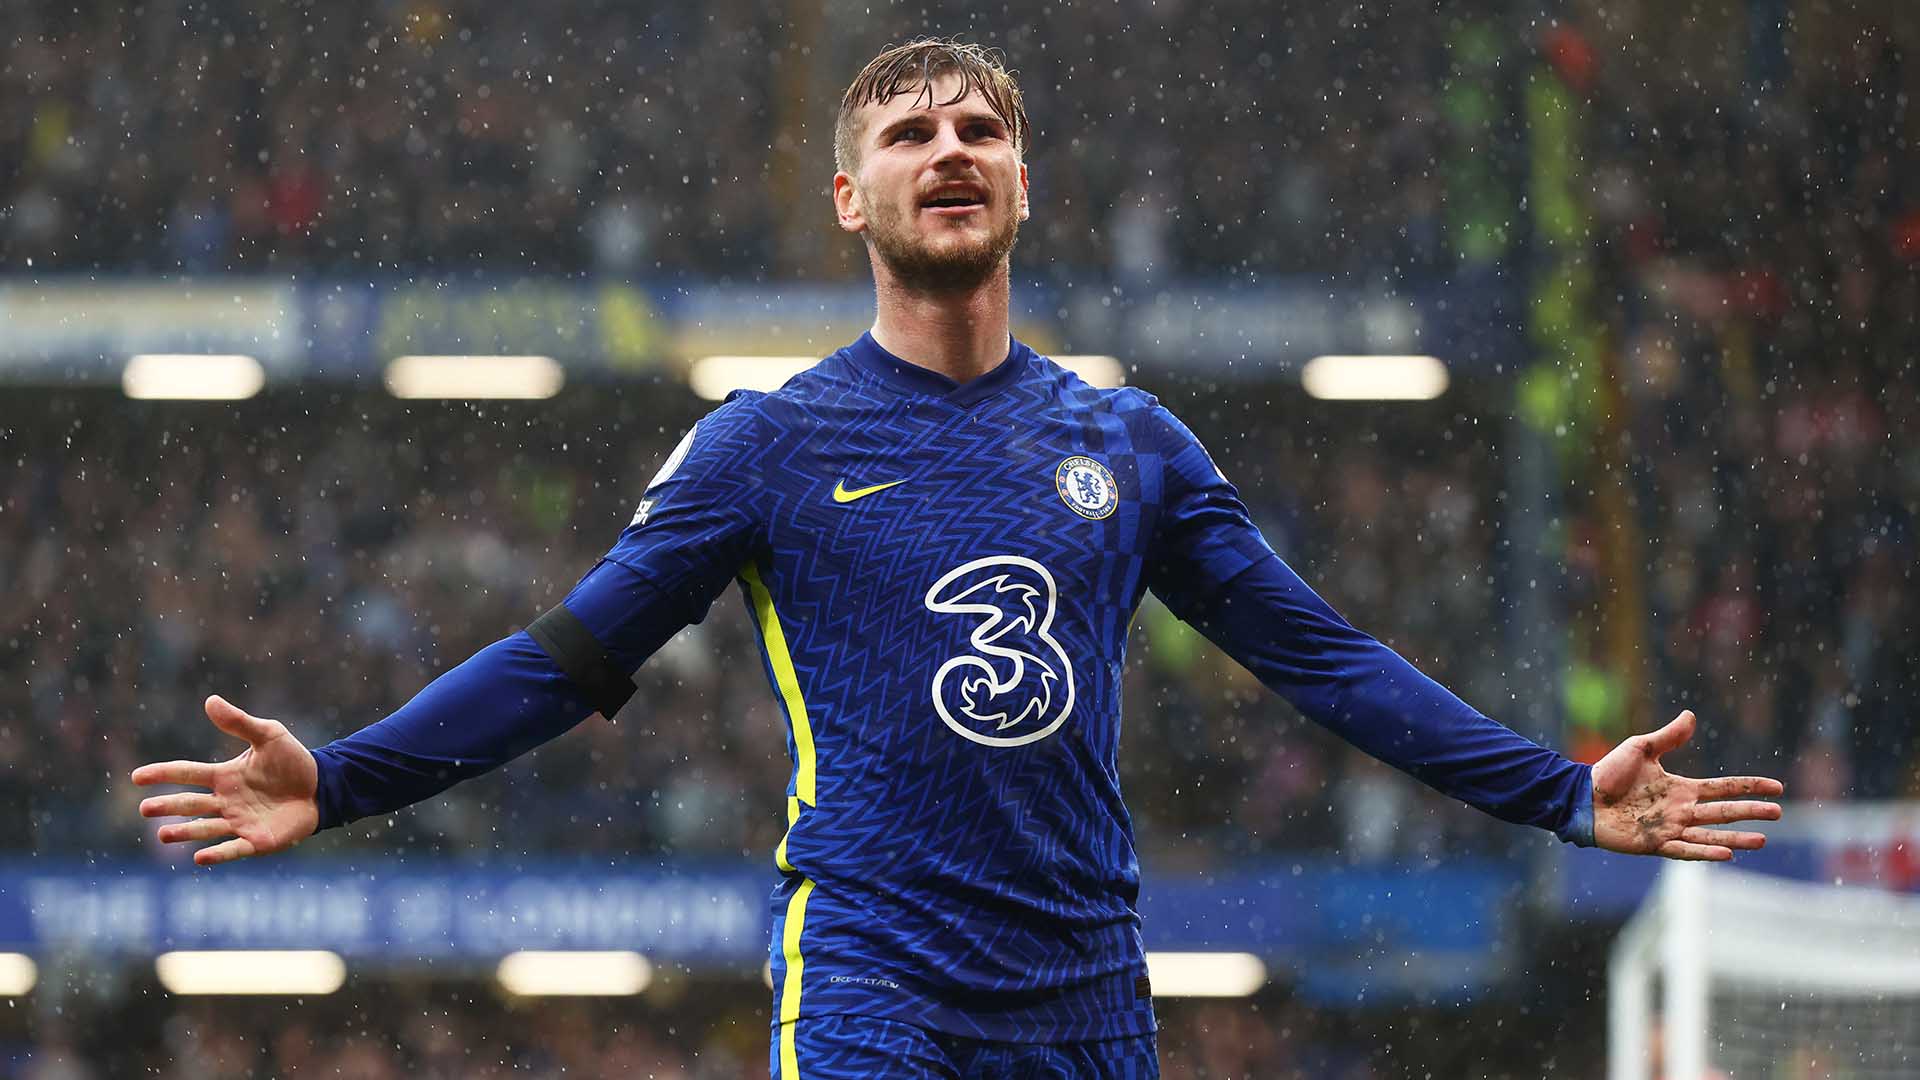 'It was the story of my whole Chelsea career!' - Werner relieved to score against Southampton after first half VAR drama